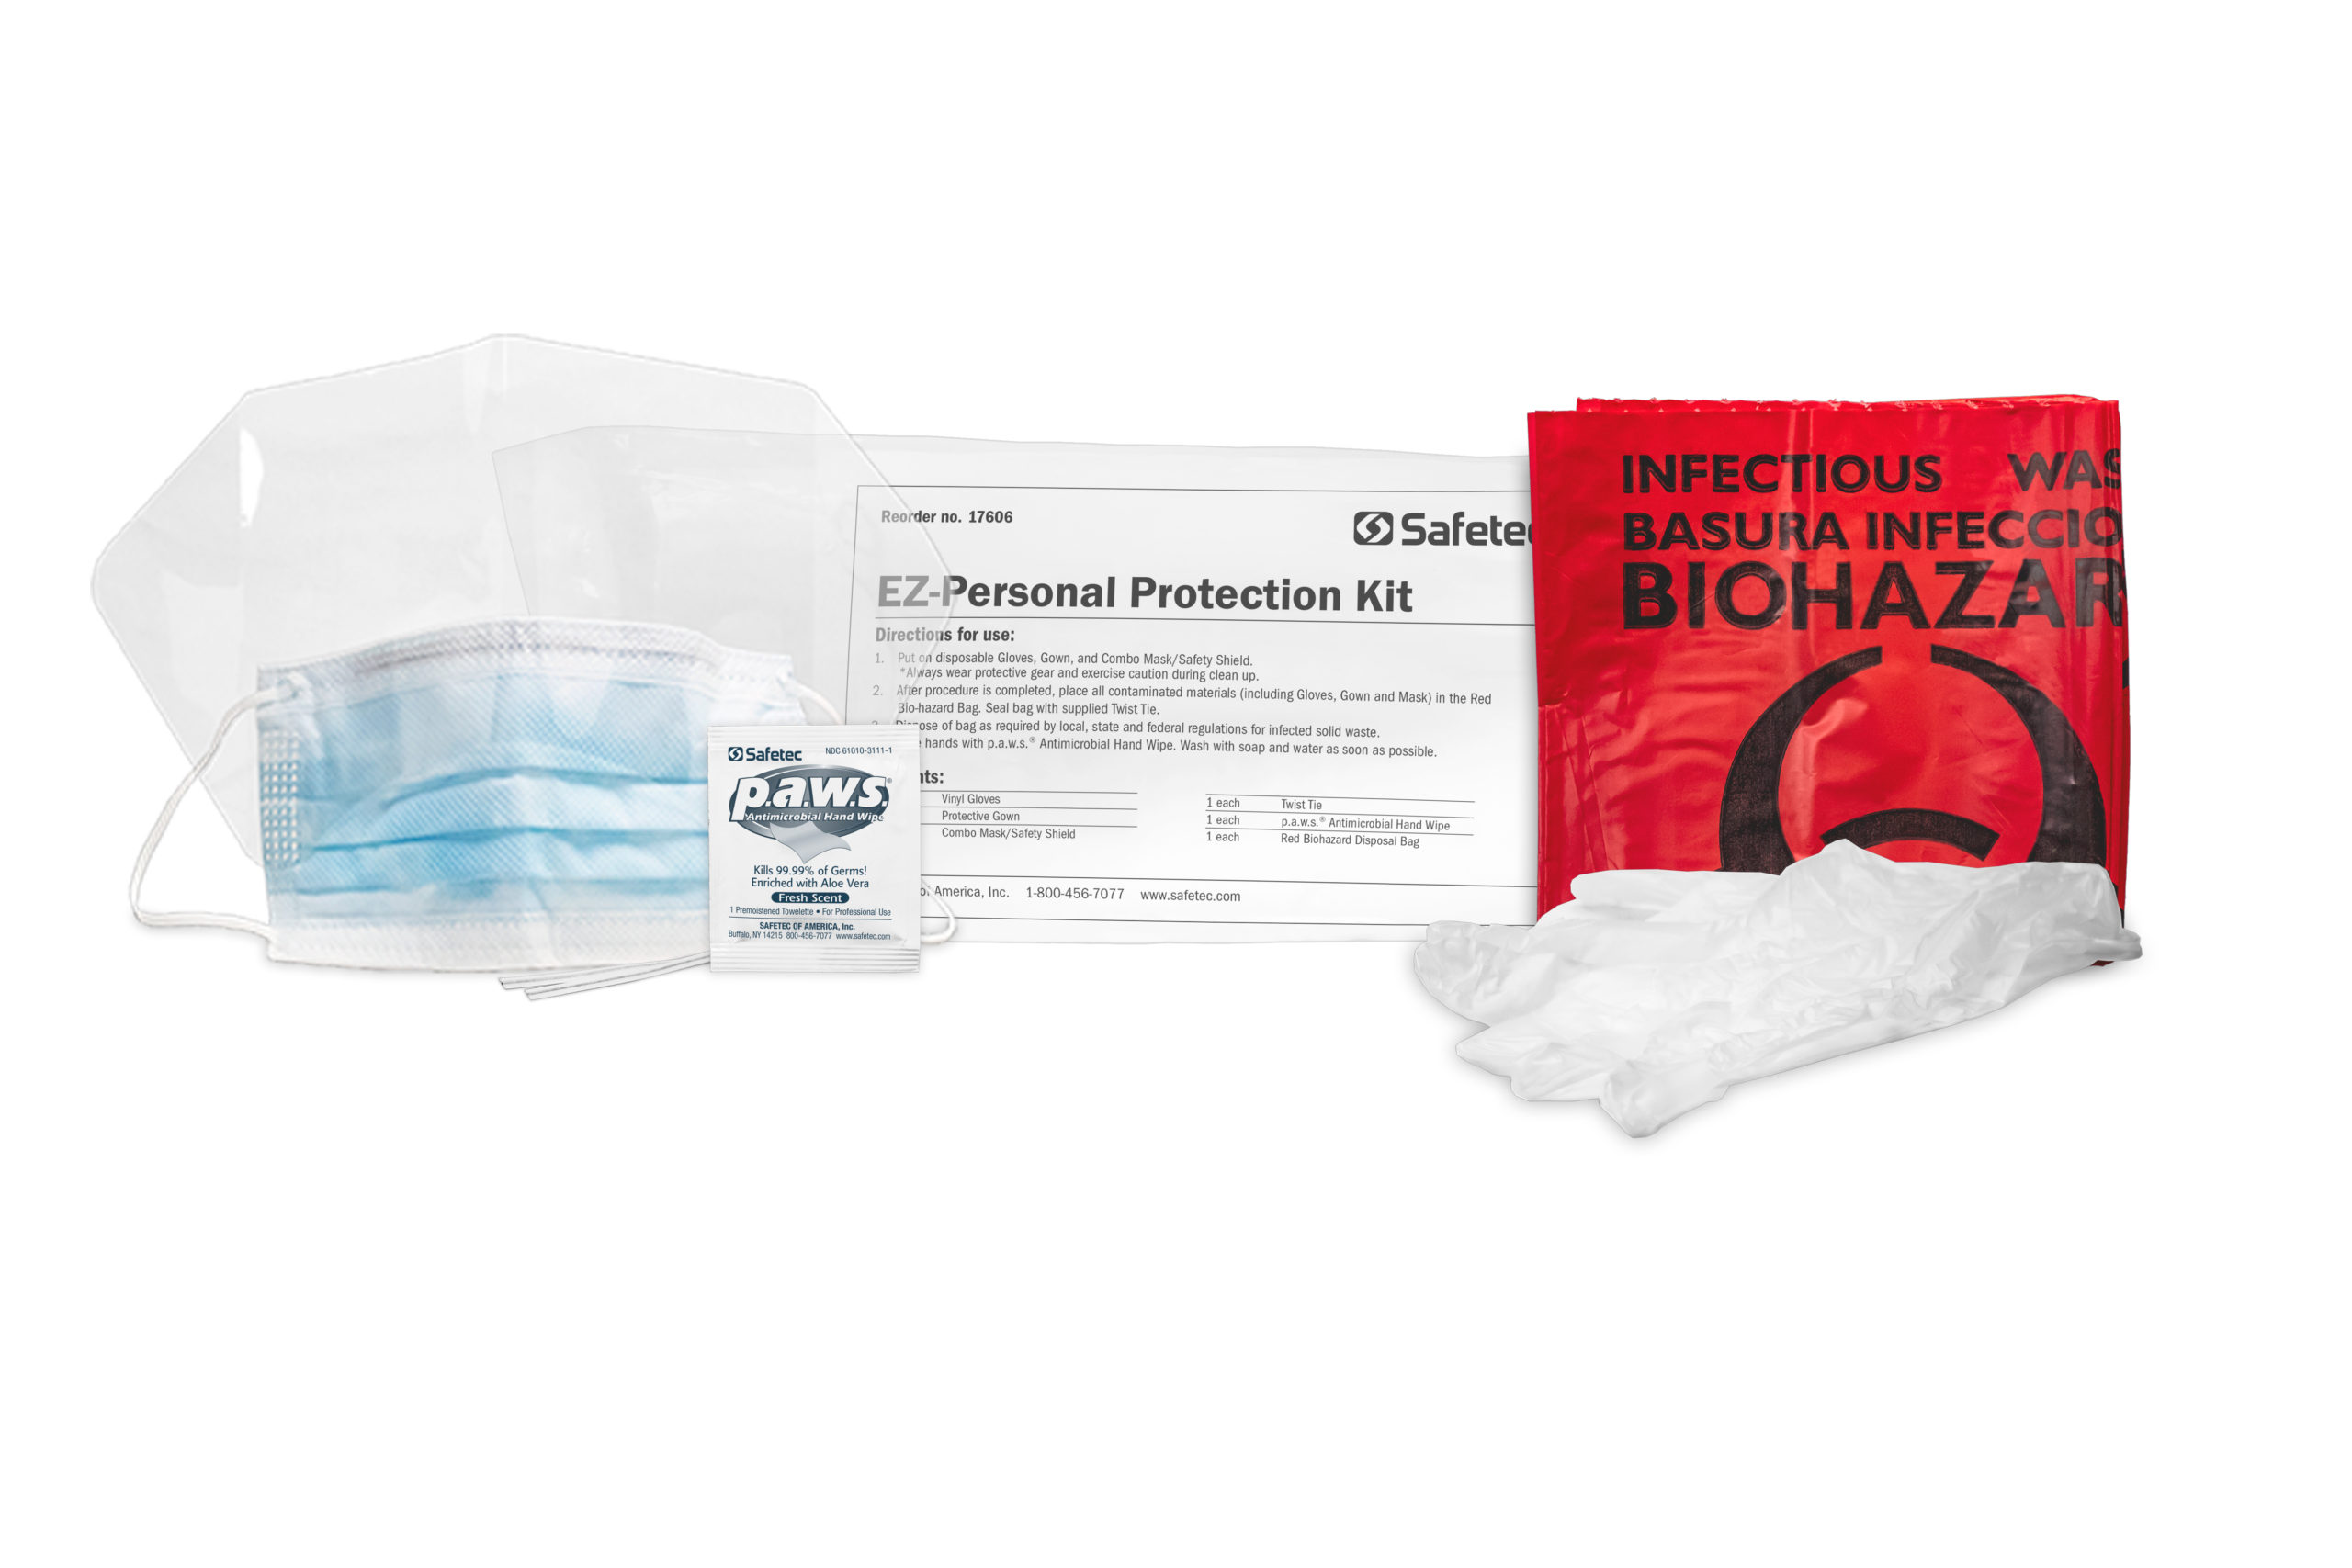 EZ-Personal Protection (PPE) Kit (17606)
